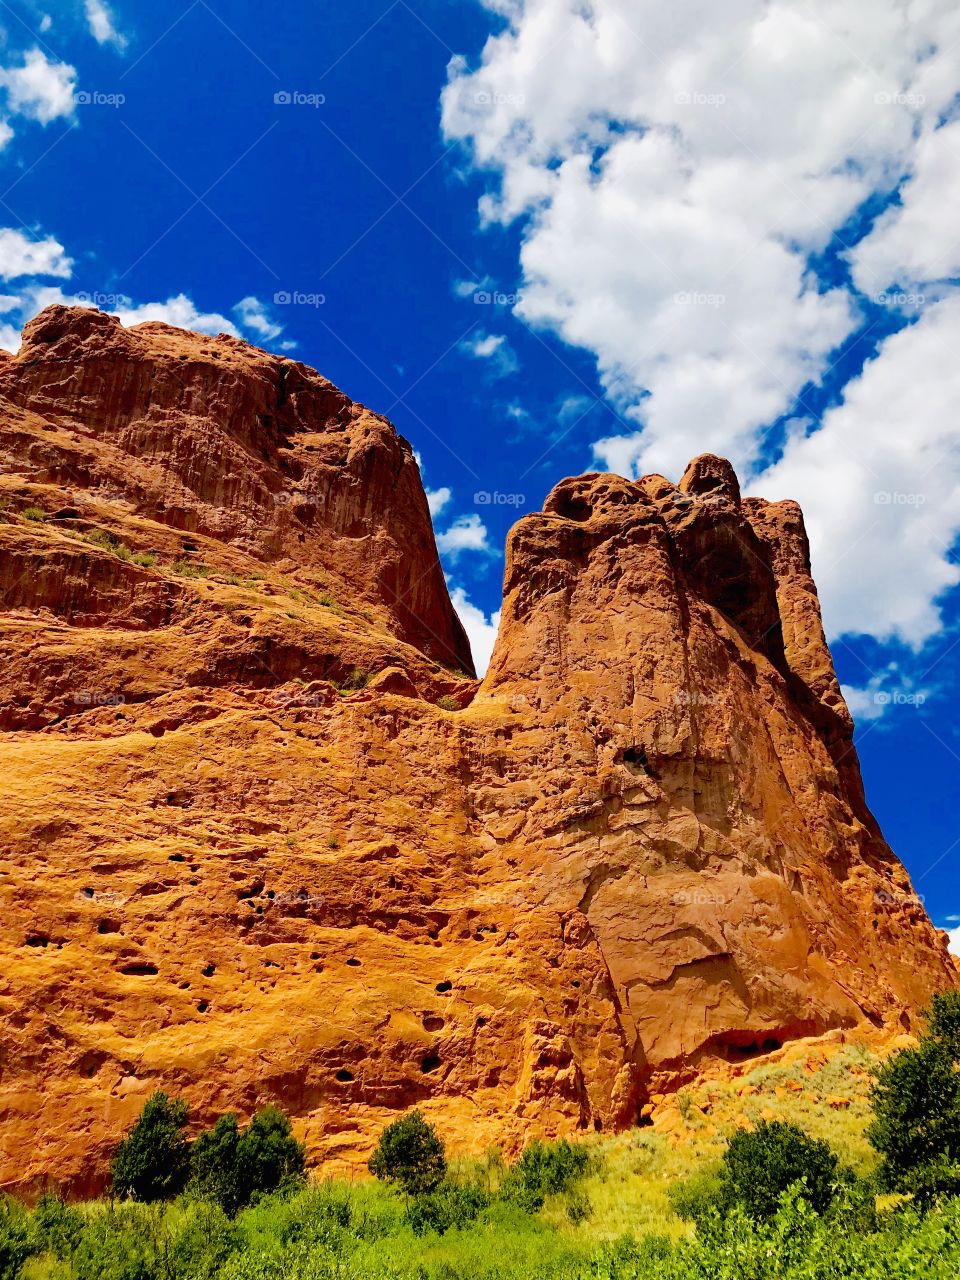 Rock formation at garden of the gods in Colorado Springs on a beautiful summer afternoon. Garden of the gods is the perfect place for a hike, walk, bike, run and they even have rock climbing spots available. Beautiful place to enjoy the outdoors.